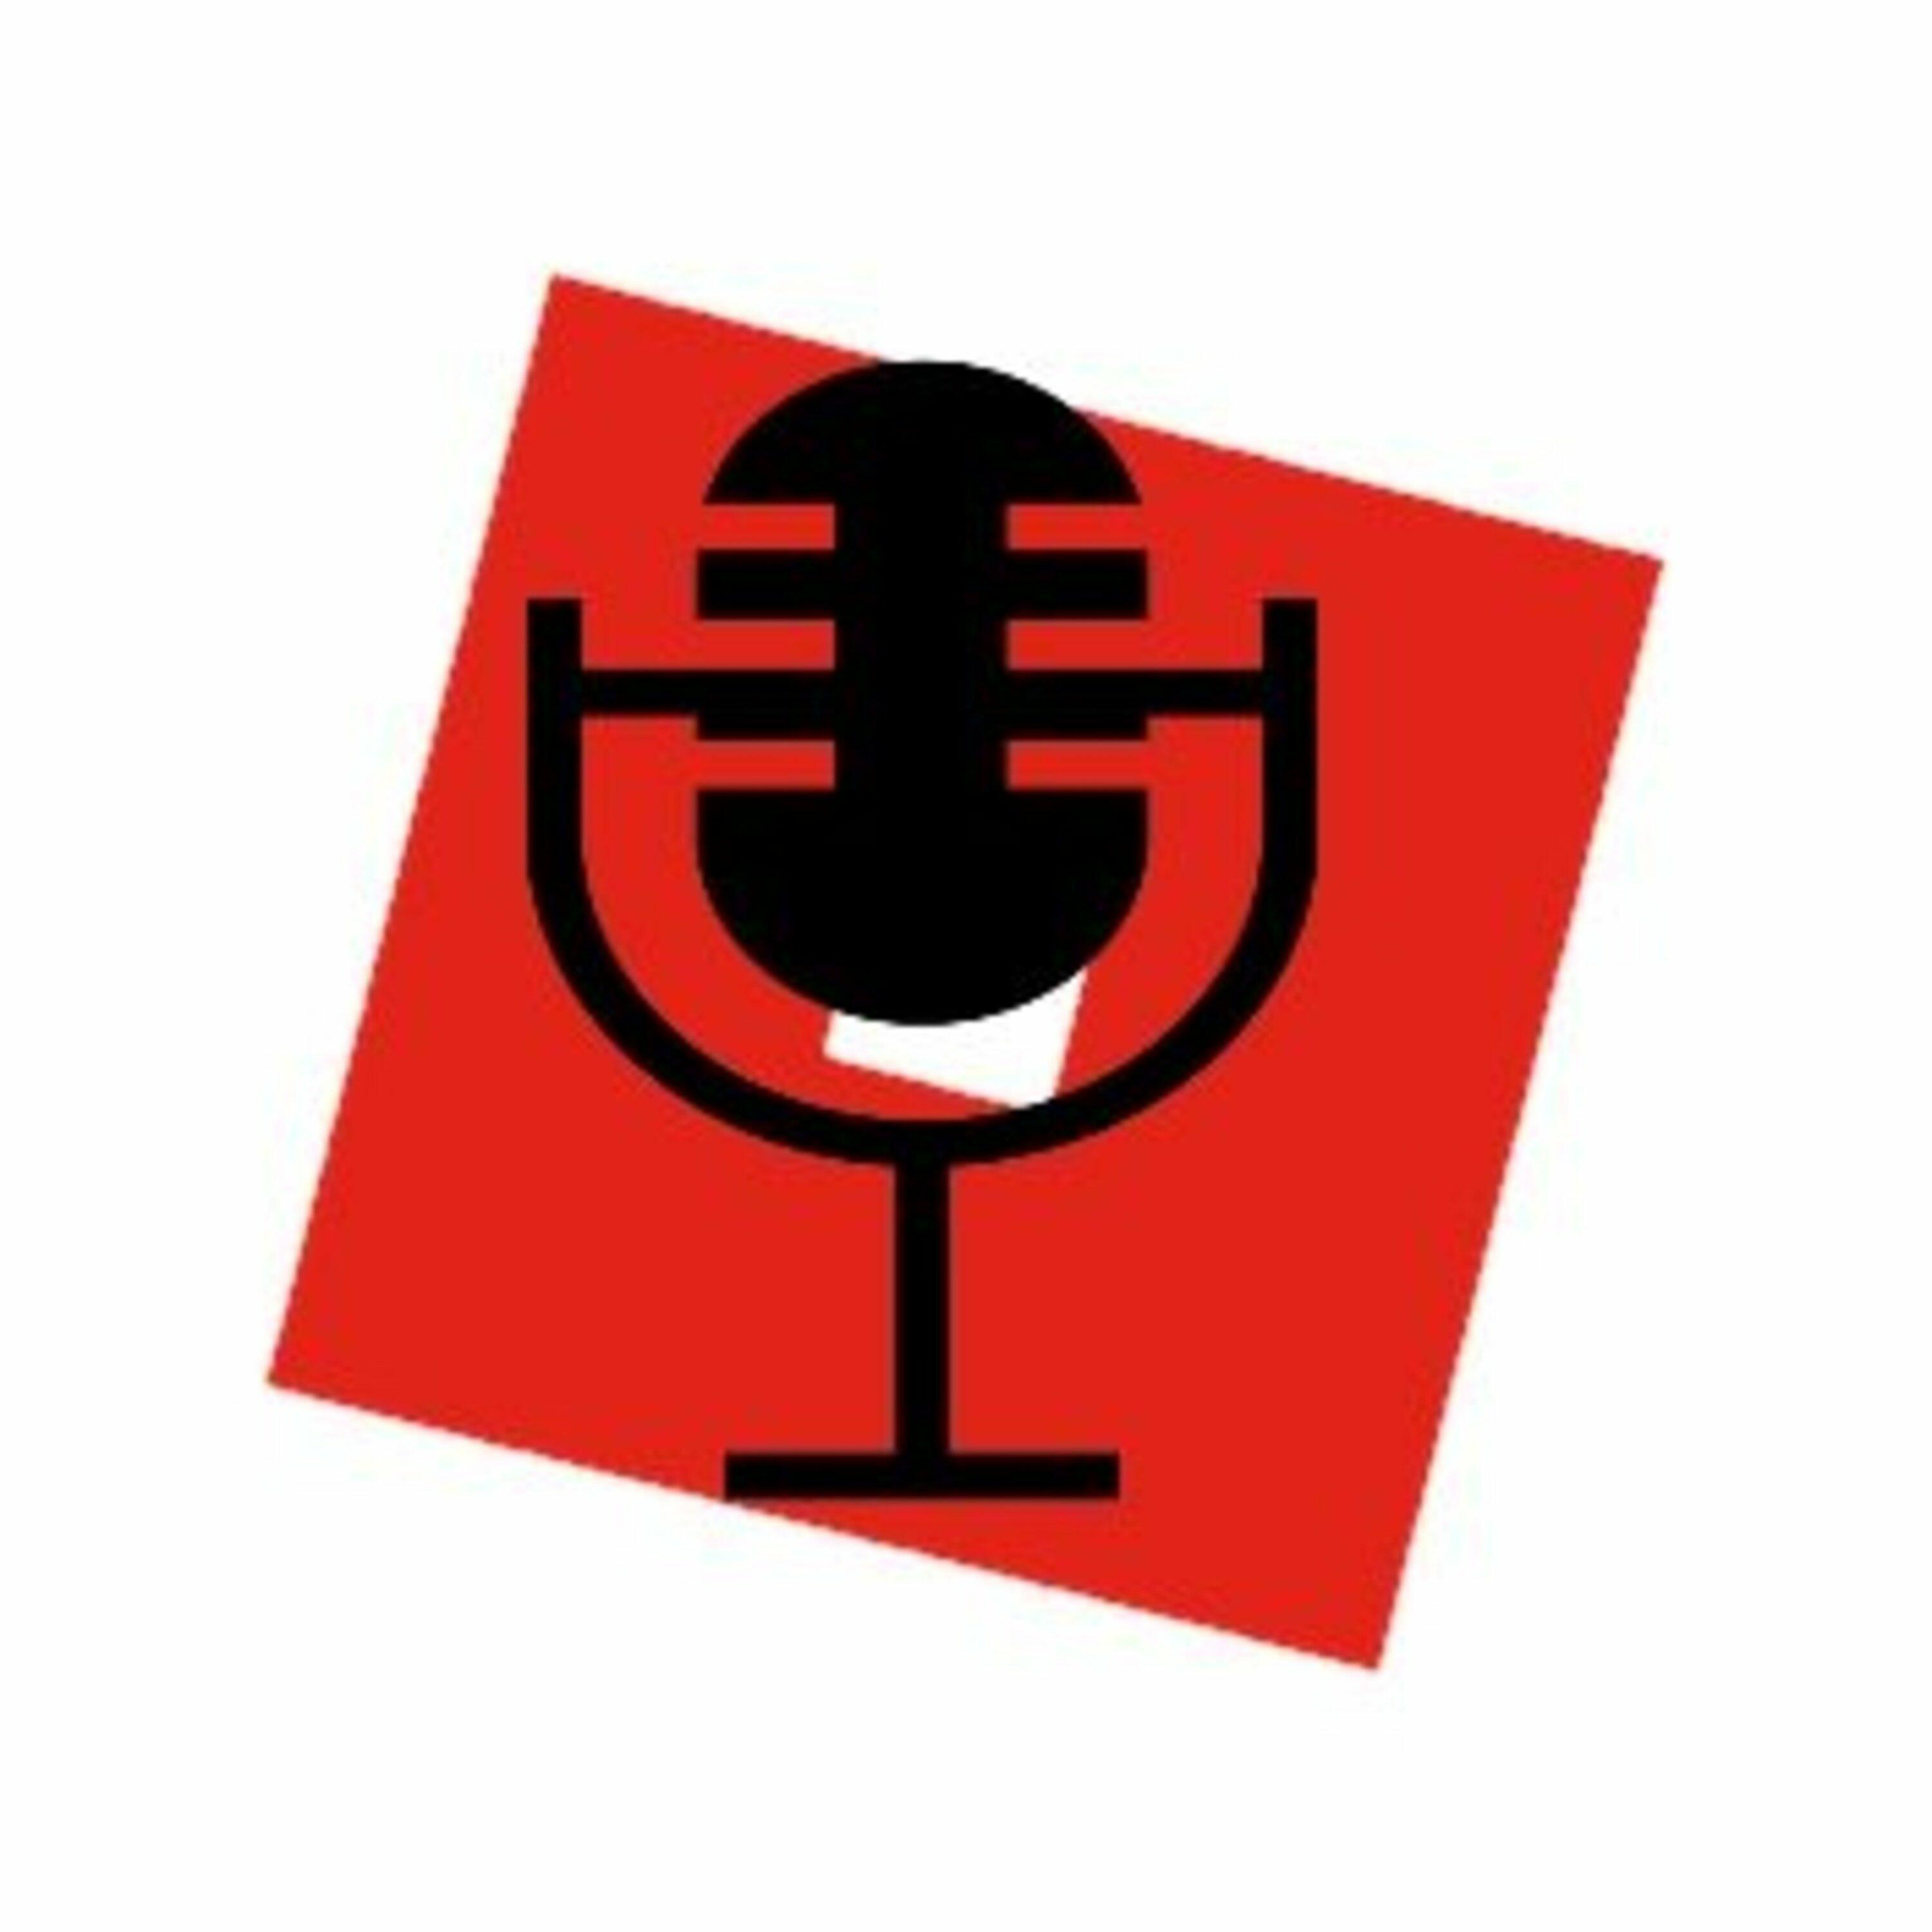 Listen To The Robloxpodcast Episode Roblox Podcast Episode 1 Very First Podcast On Iheartradio Iheartradio - iheartradio roblox